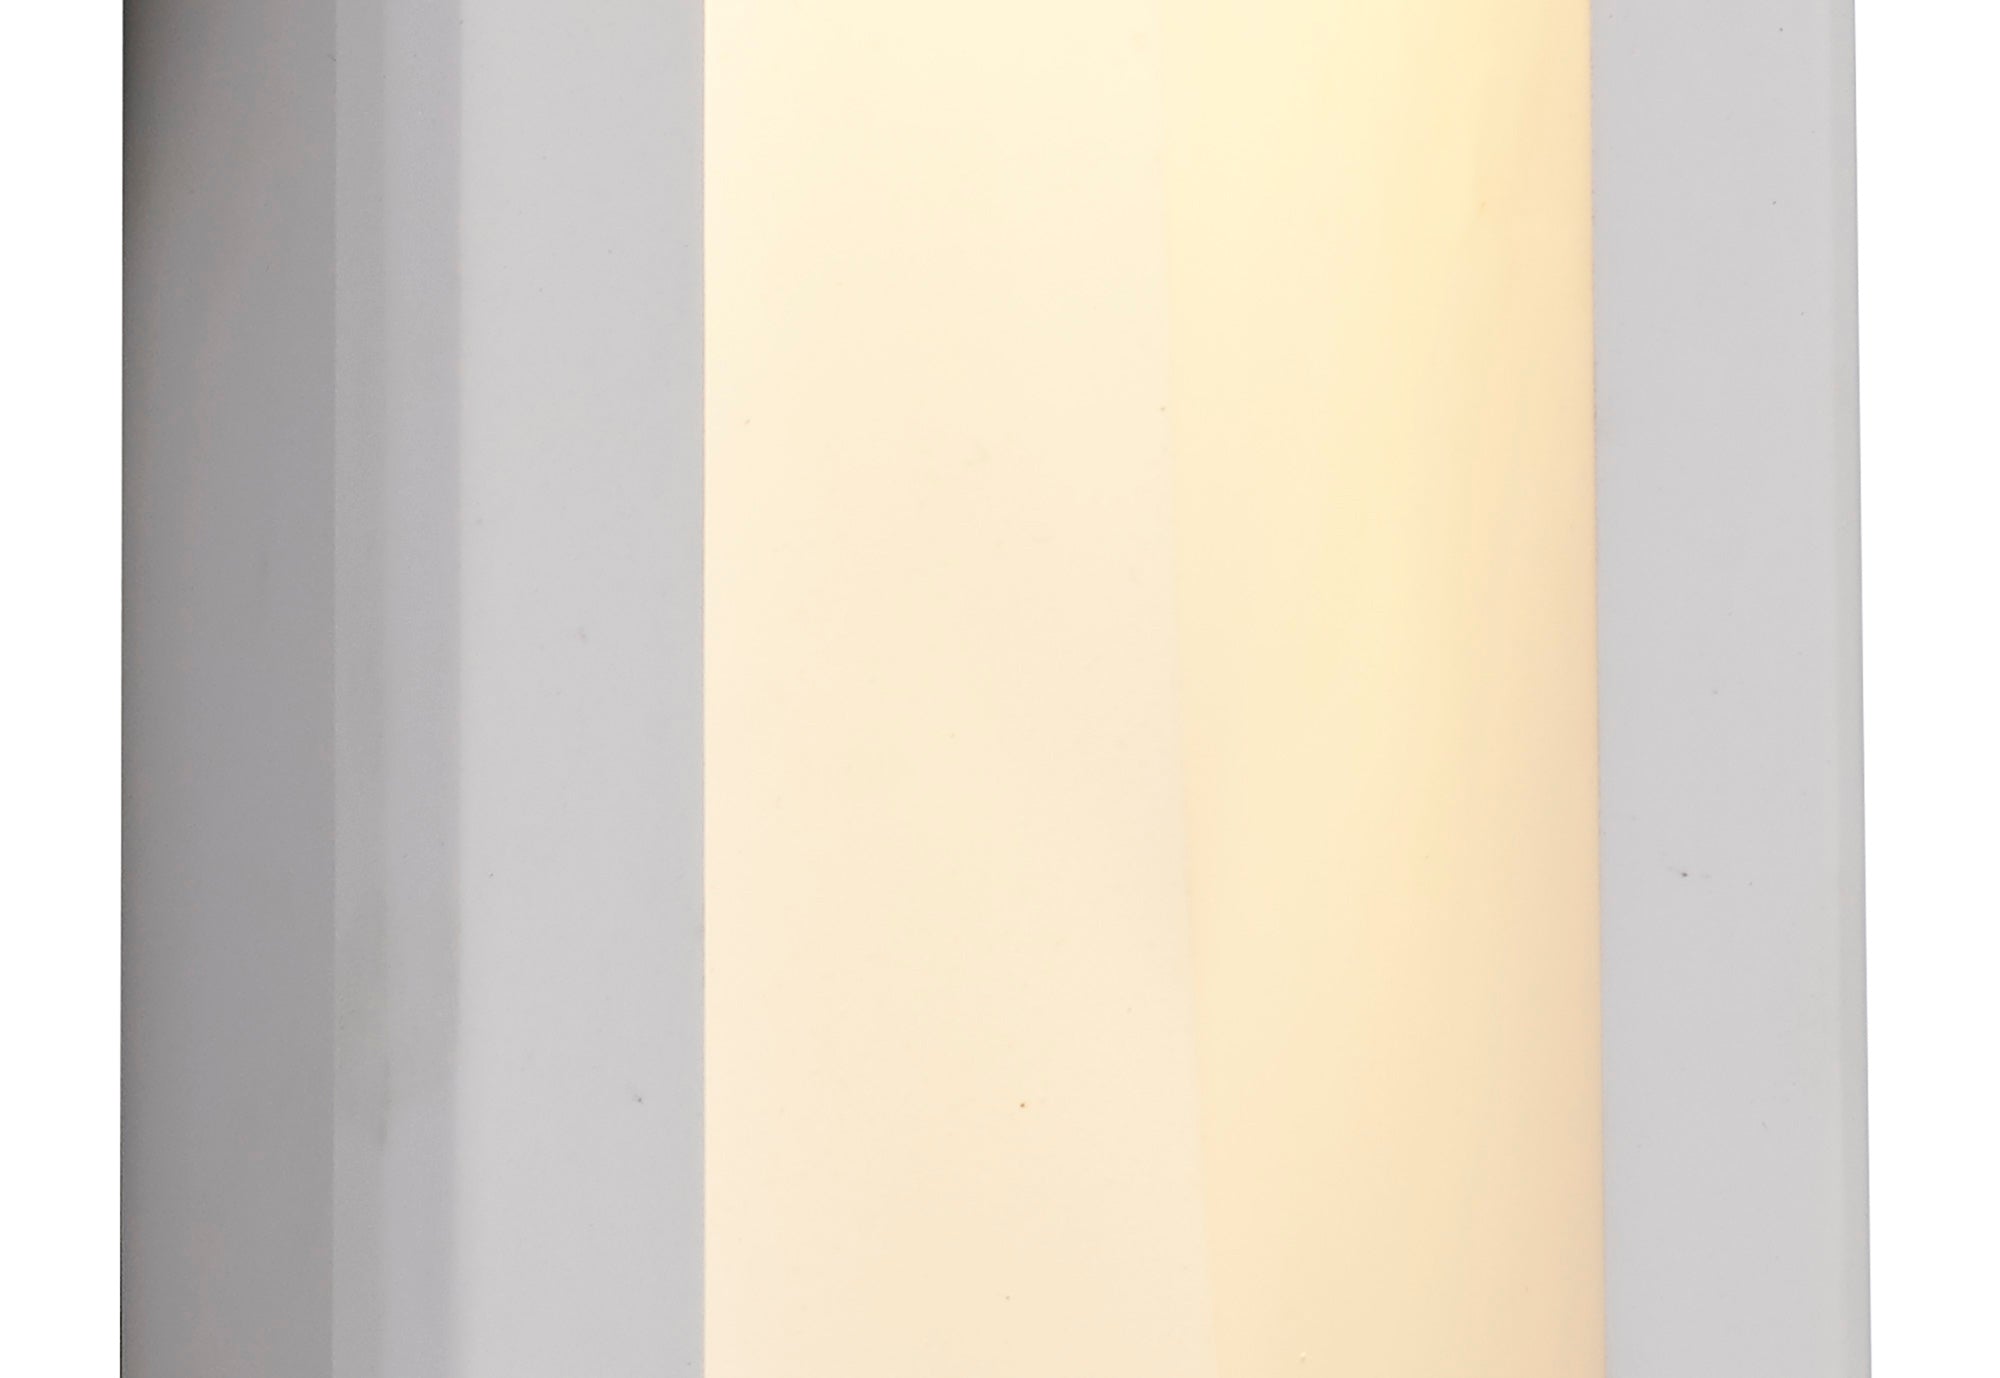 Plastin Large Recessed Wall Lamp, 1 x GU10, White Paintable Gypsum, Cut Out: L:453mmxW:103mm